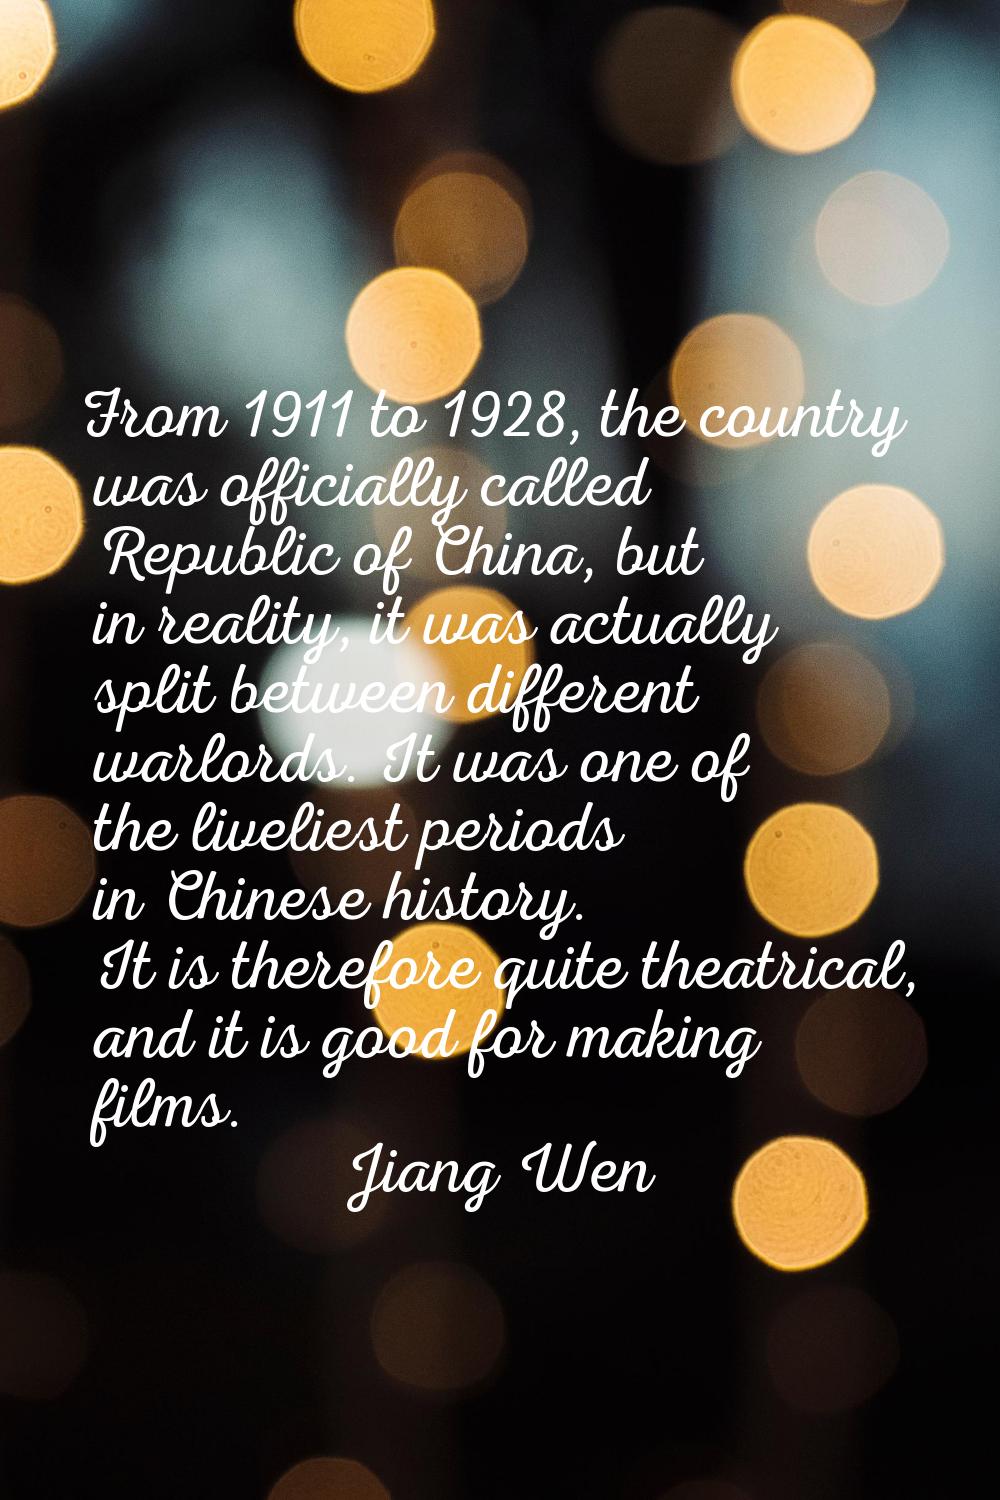 From 1911 to 1928, the country was officially called Republic of China, but in reality, it was actu